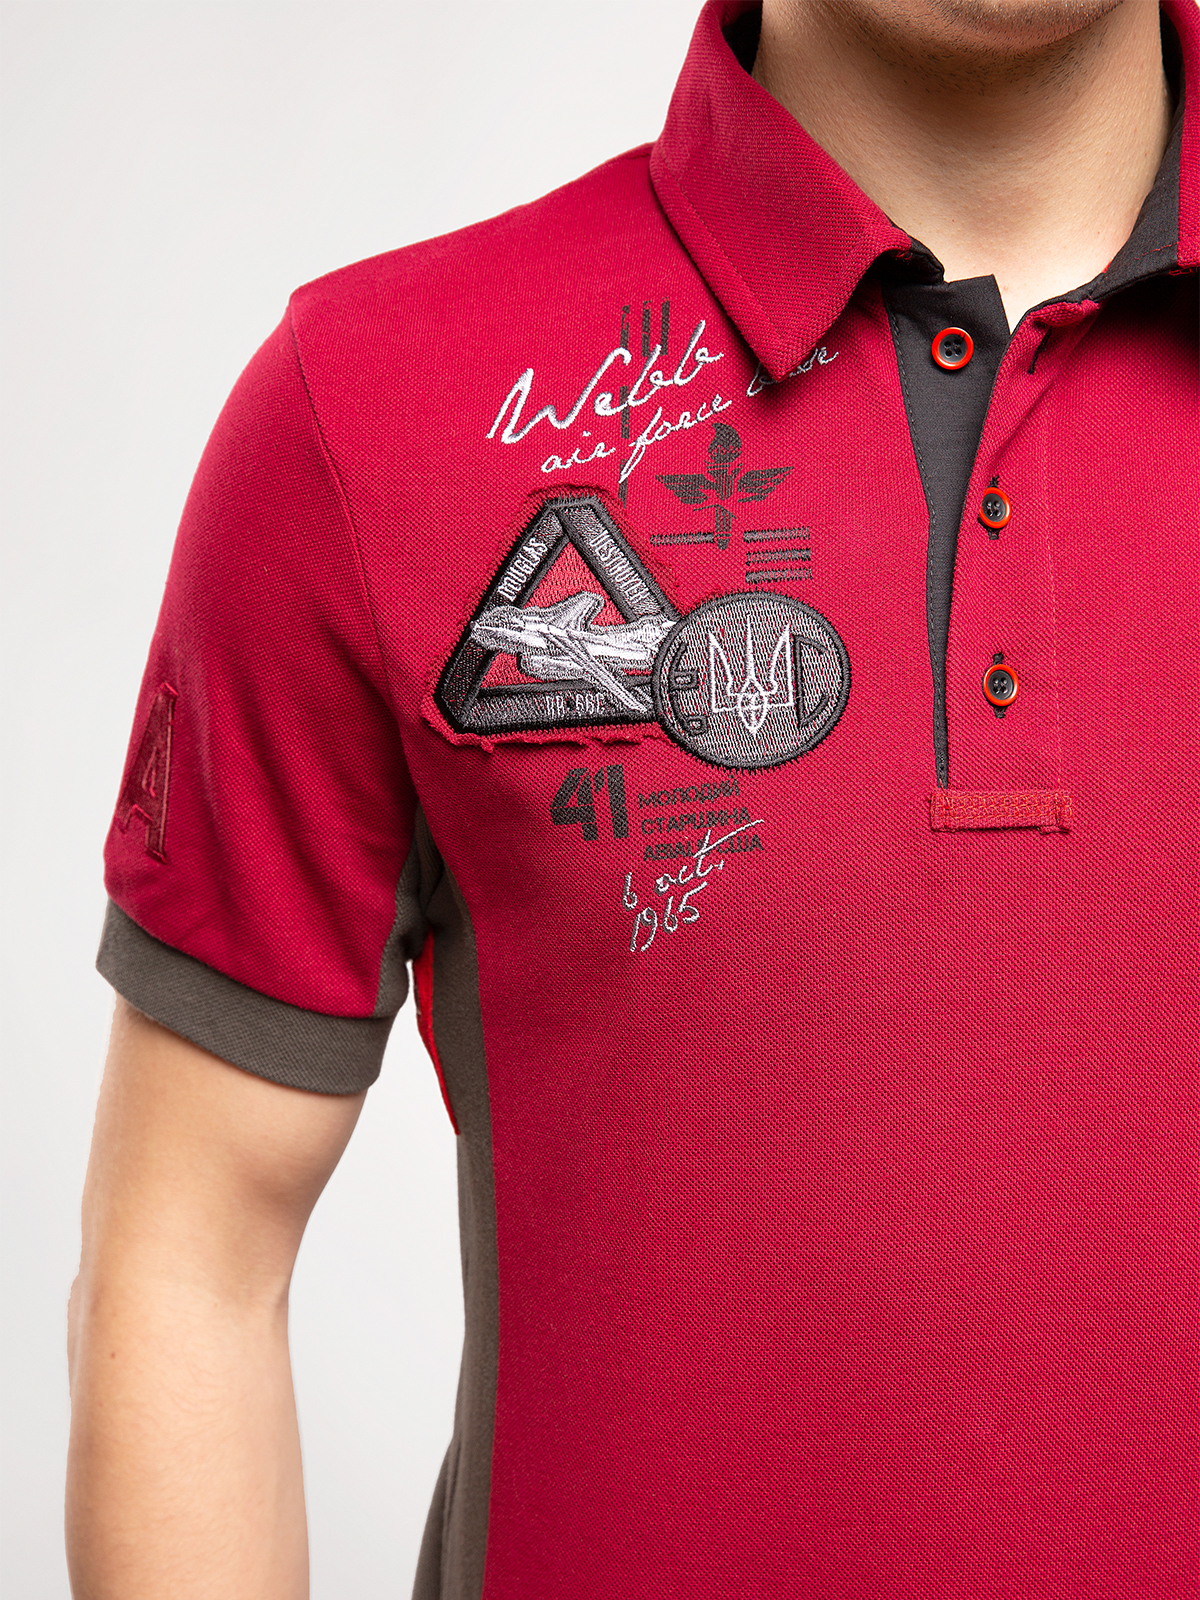 Women's Polo Shirt Flying Cossacks. Color claret. 
Height of the model: 175 cm.